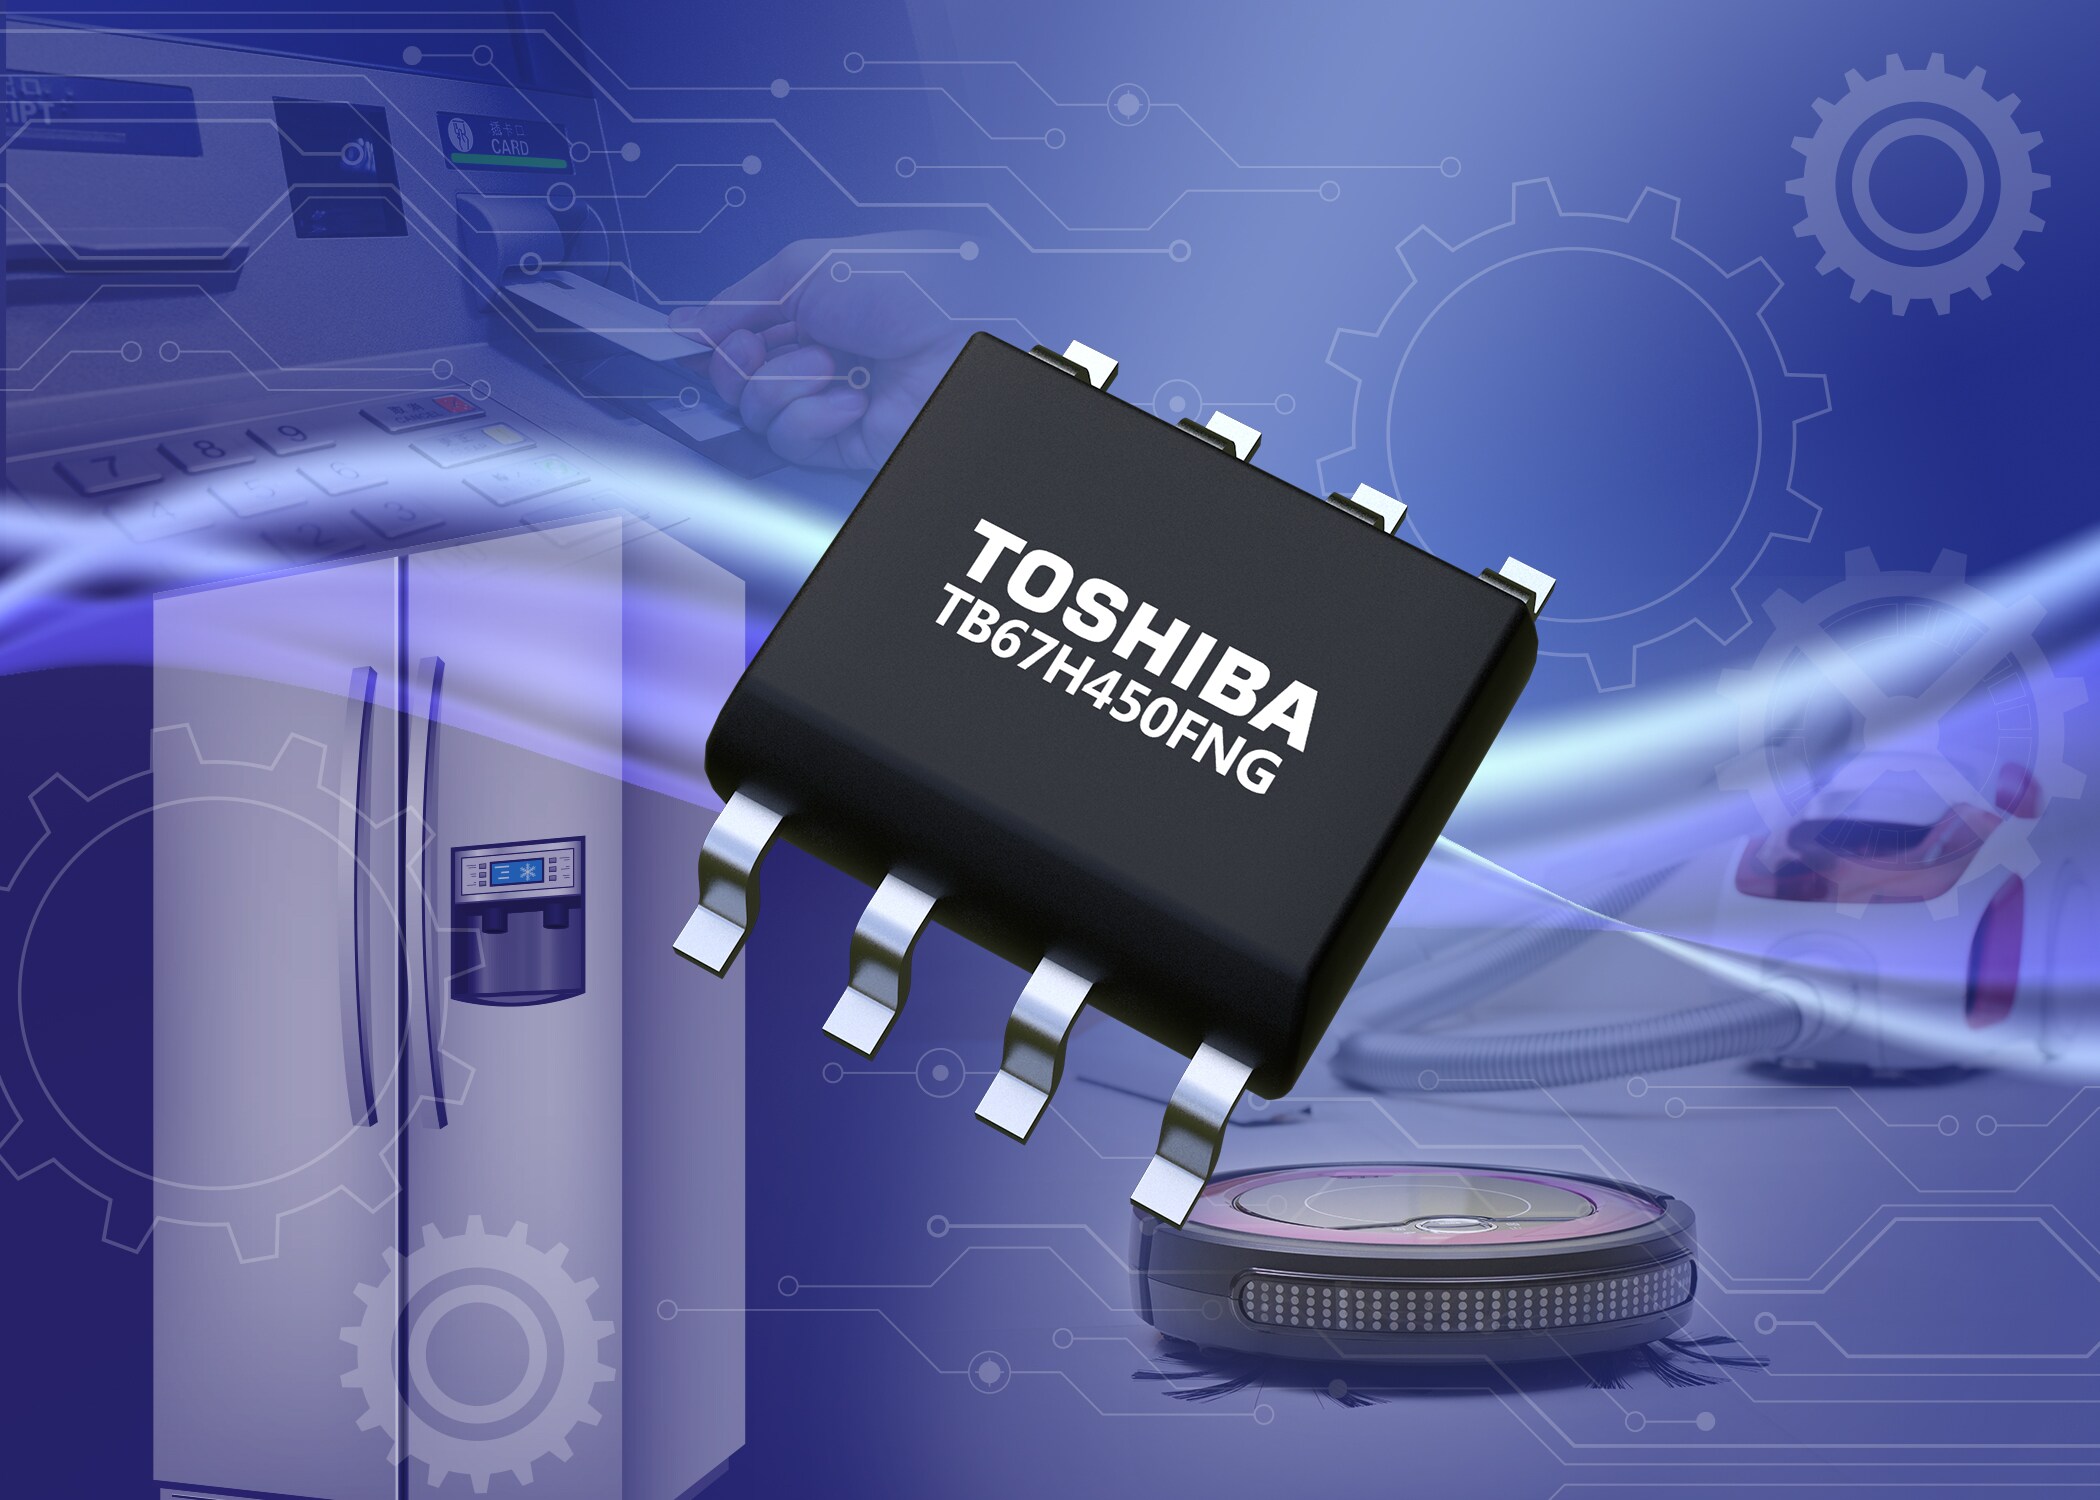 Toshiba launches compact, high-efficiency DC brushed motor driver IC with popular pin-assignment HSOP8 Package